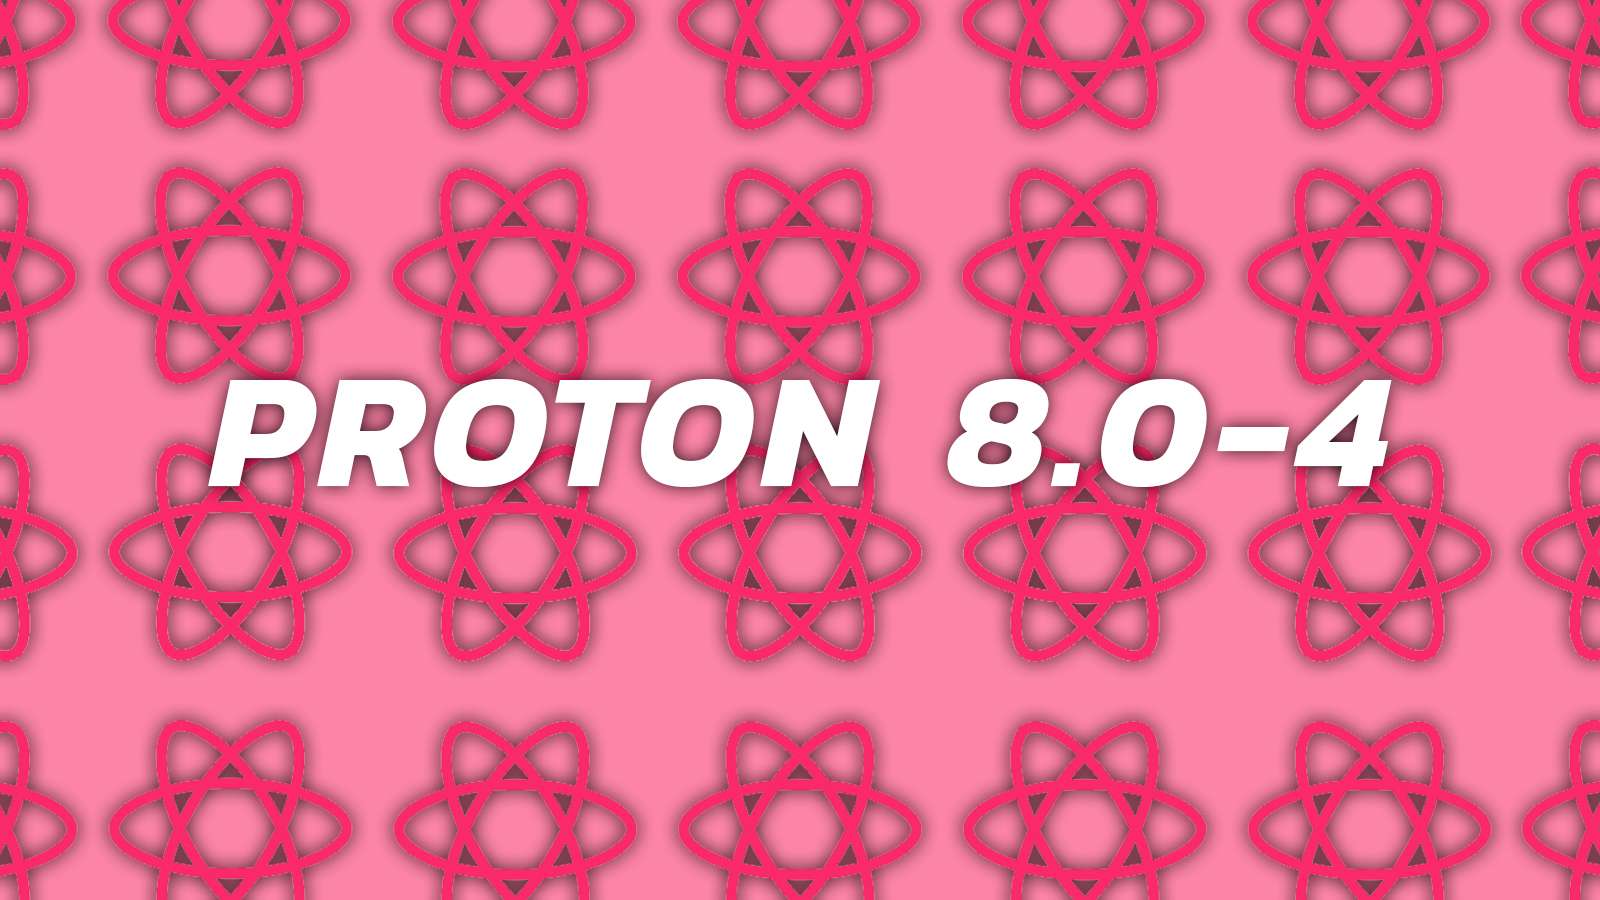 proton logo on a pink background with the text saying proton 8.0-4